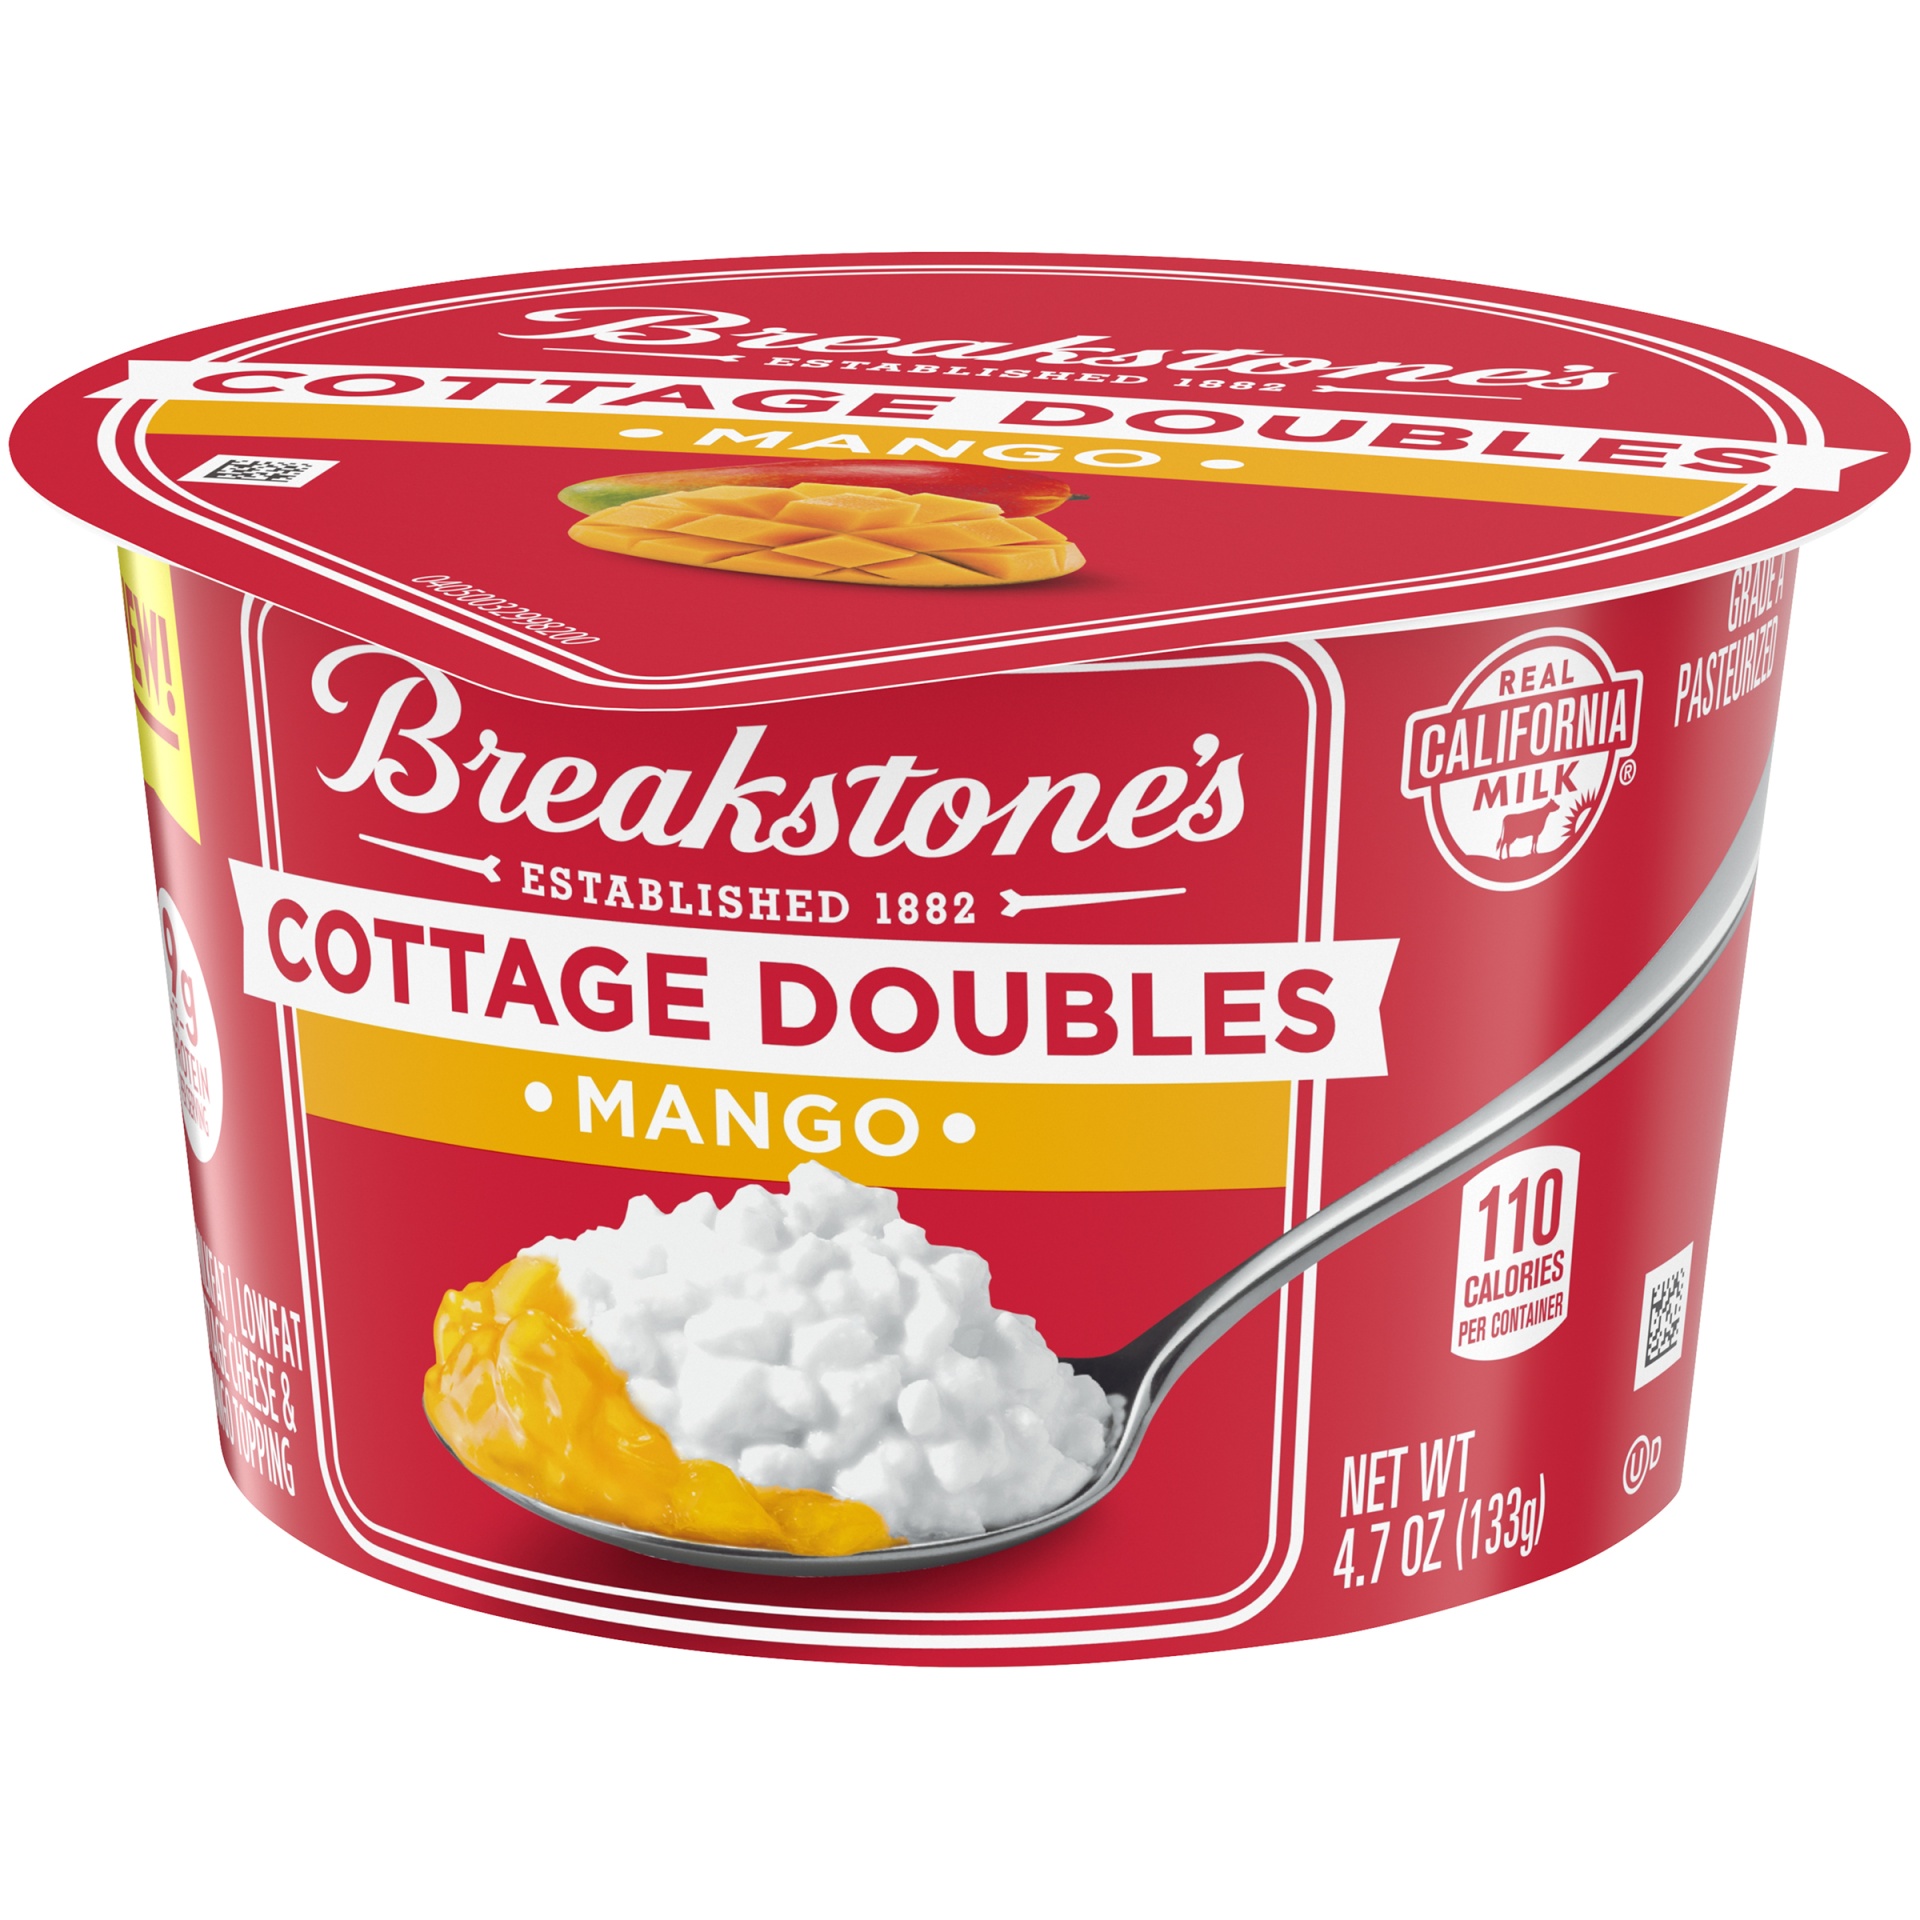 slide 3 of 6, Breakstone's Cottage Doubles Lowfat Cottage Cheese & Mango Topping with 2% Milkfat Cup, 4.7 oz